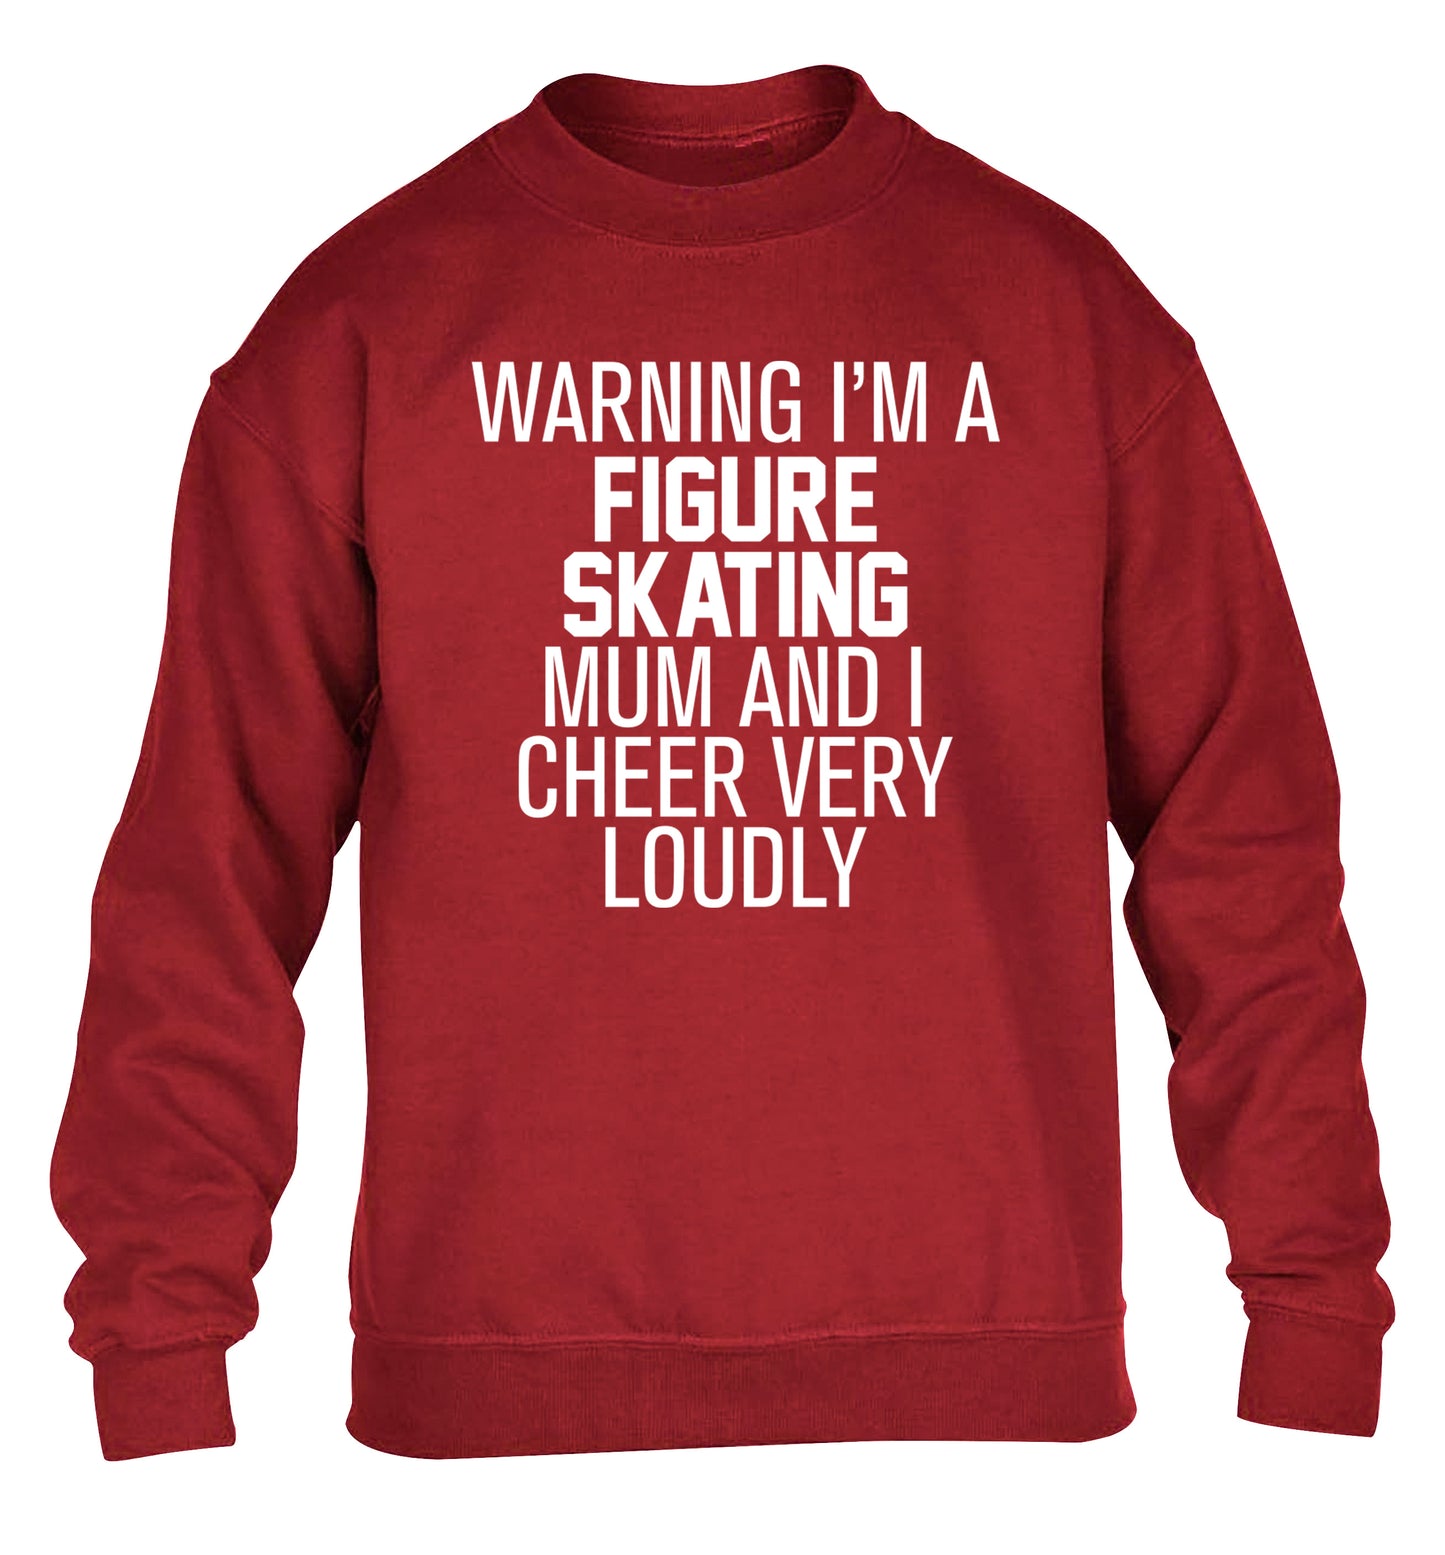 Warning I'm a figure skating mum and I cheer very loudly children's grey sweater 12-14 Years